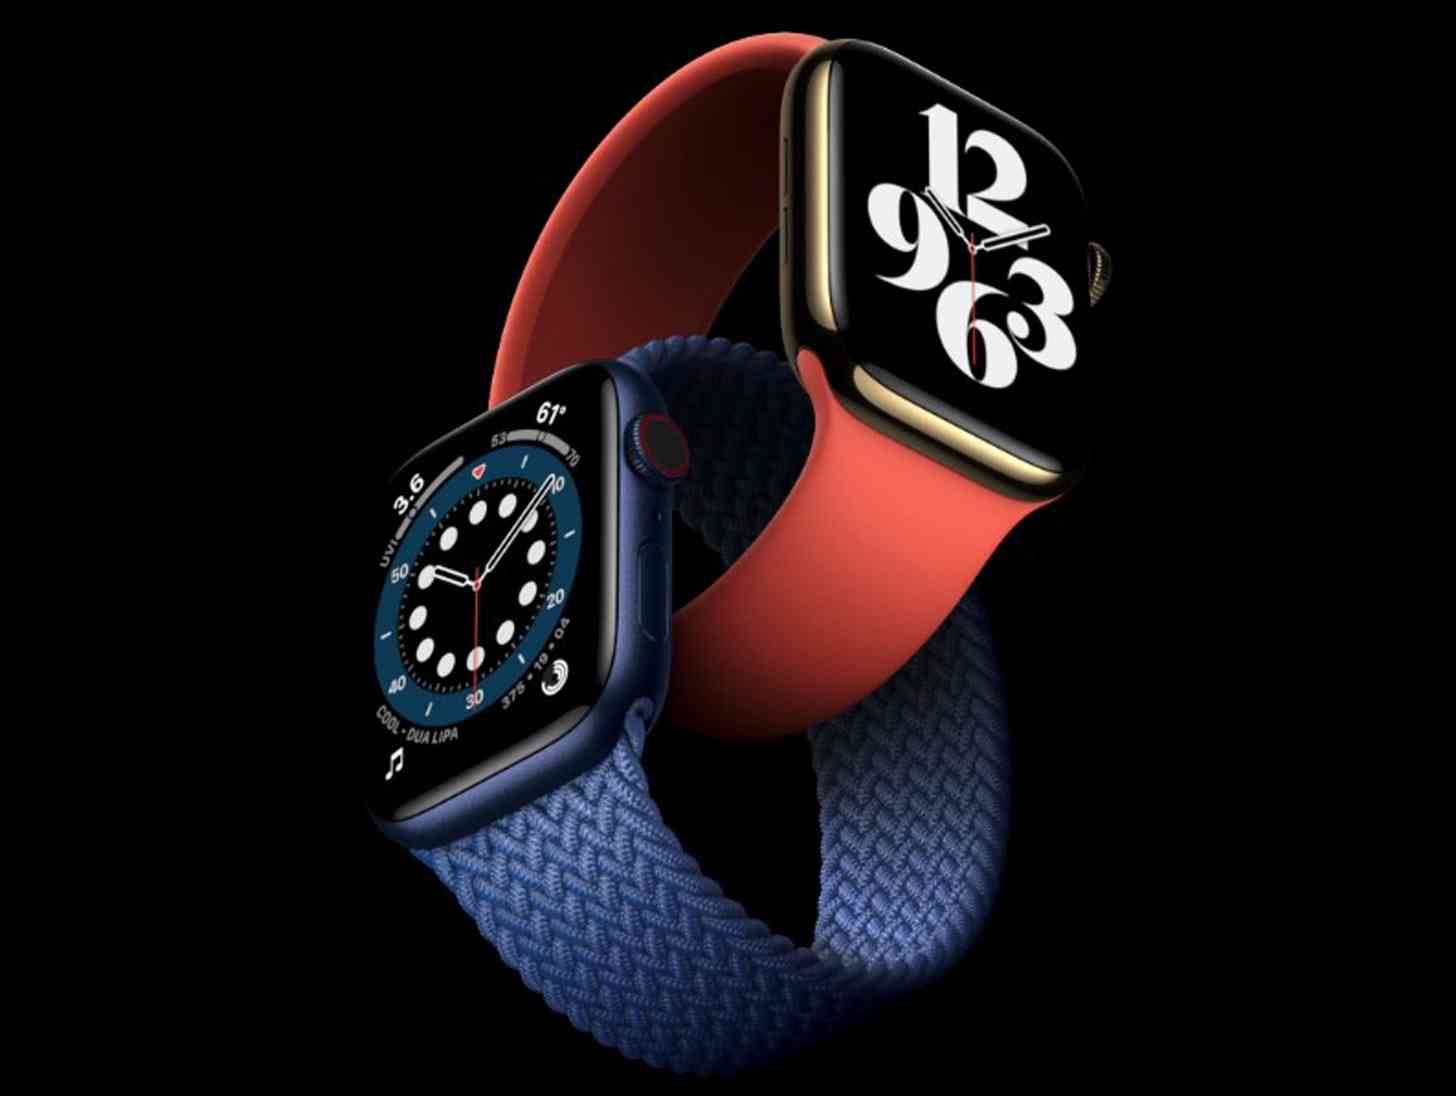 Apple Watch Series 6 official with new color options, blood oxygen